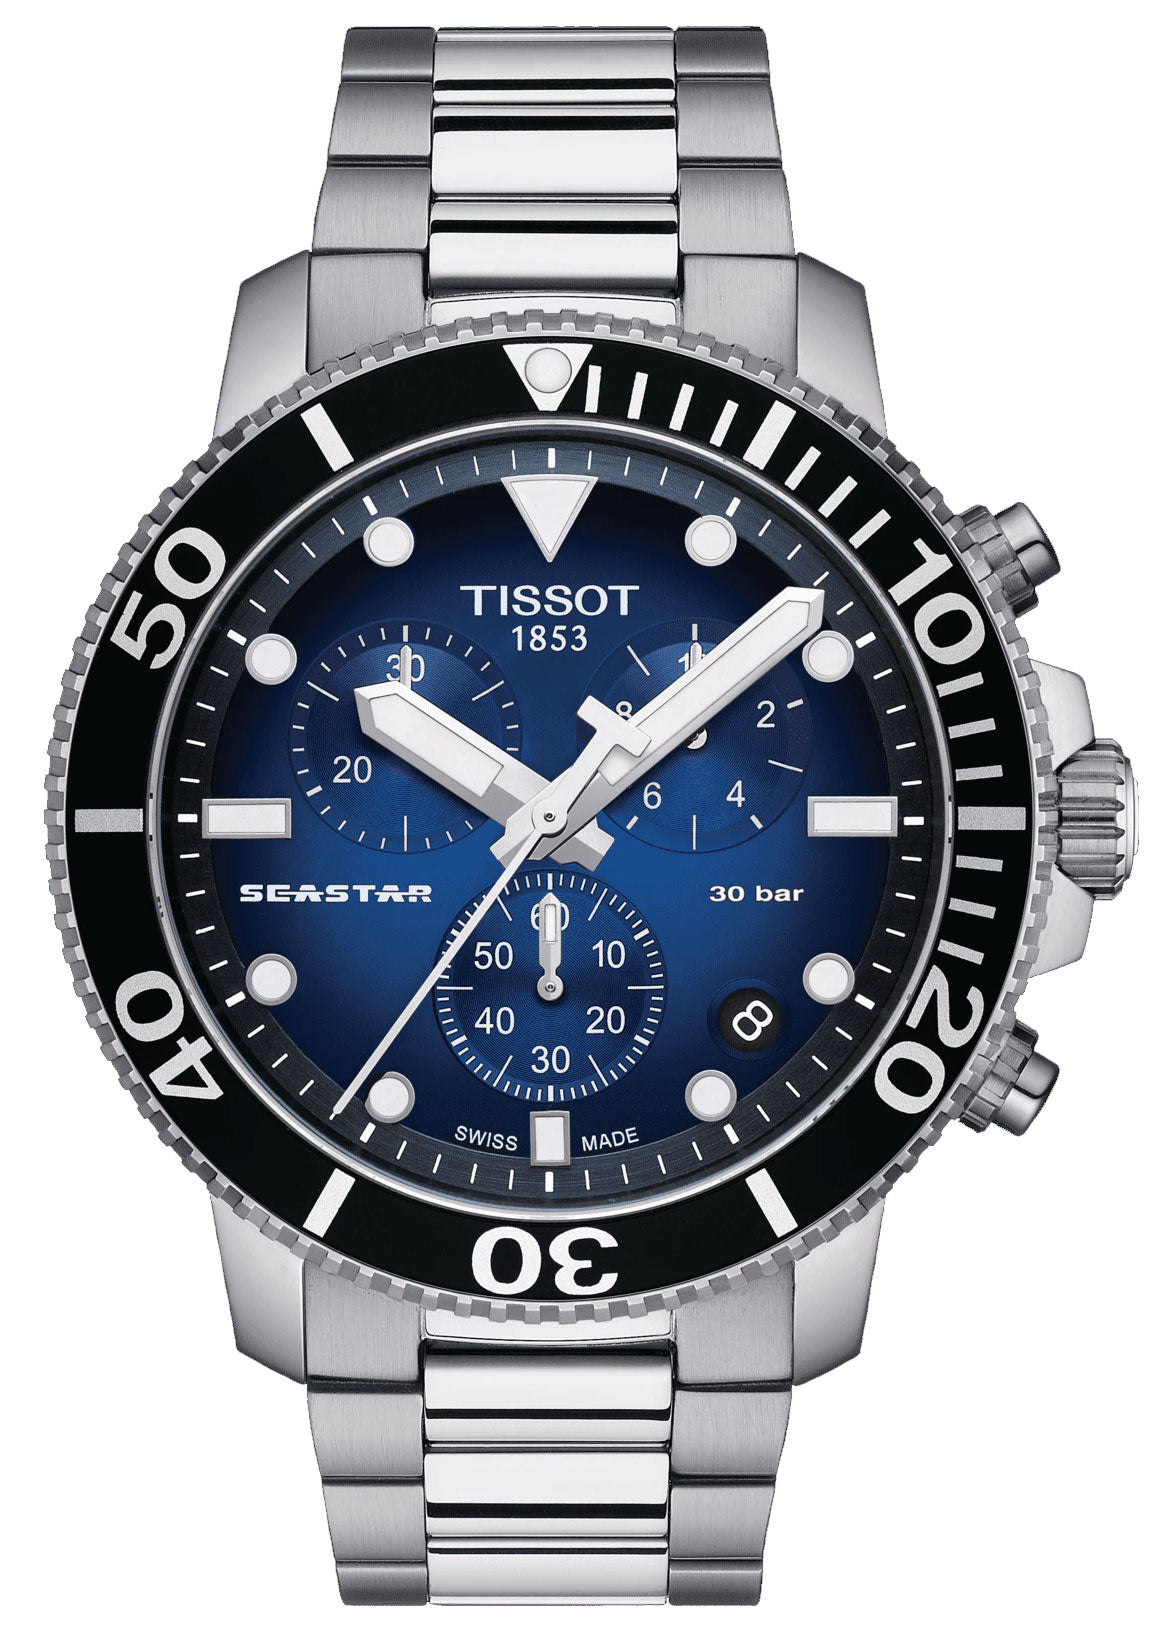 update alt-text with template Watches - Mens-Tissot-T120.417.11.041.01-40 - 45 mm, 45 - 50 mm, blue, chronograph, date, divers, mens, menswatches, new arrivals, round, rpSKU_T120.417.11.041.03, rpSKU_T120.417.11.091.00, rpSKU_T120.417.11.091.01, rpSKU_T120.417.11.421.00, rpSKU_T120.417.17.041.00, Seastar, seconds sub-dial, stainless steel band, stainless steel case, swiss quartz, Tissot, uni-directional rotating bezel, watches-Watches & Beyond